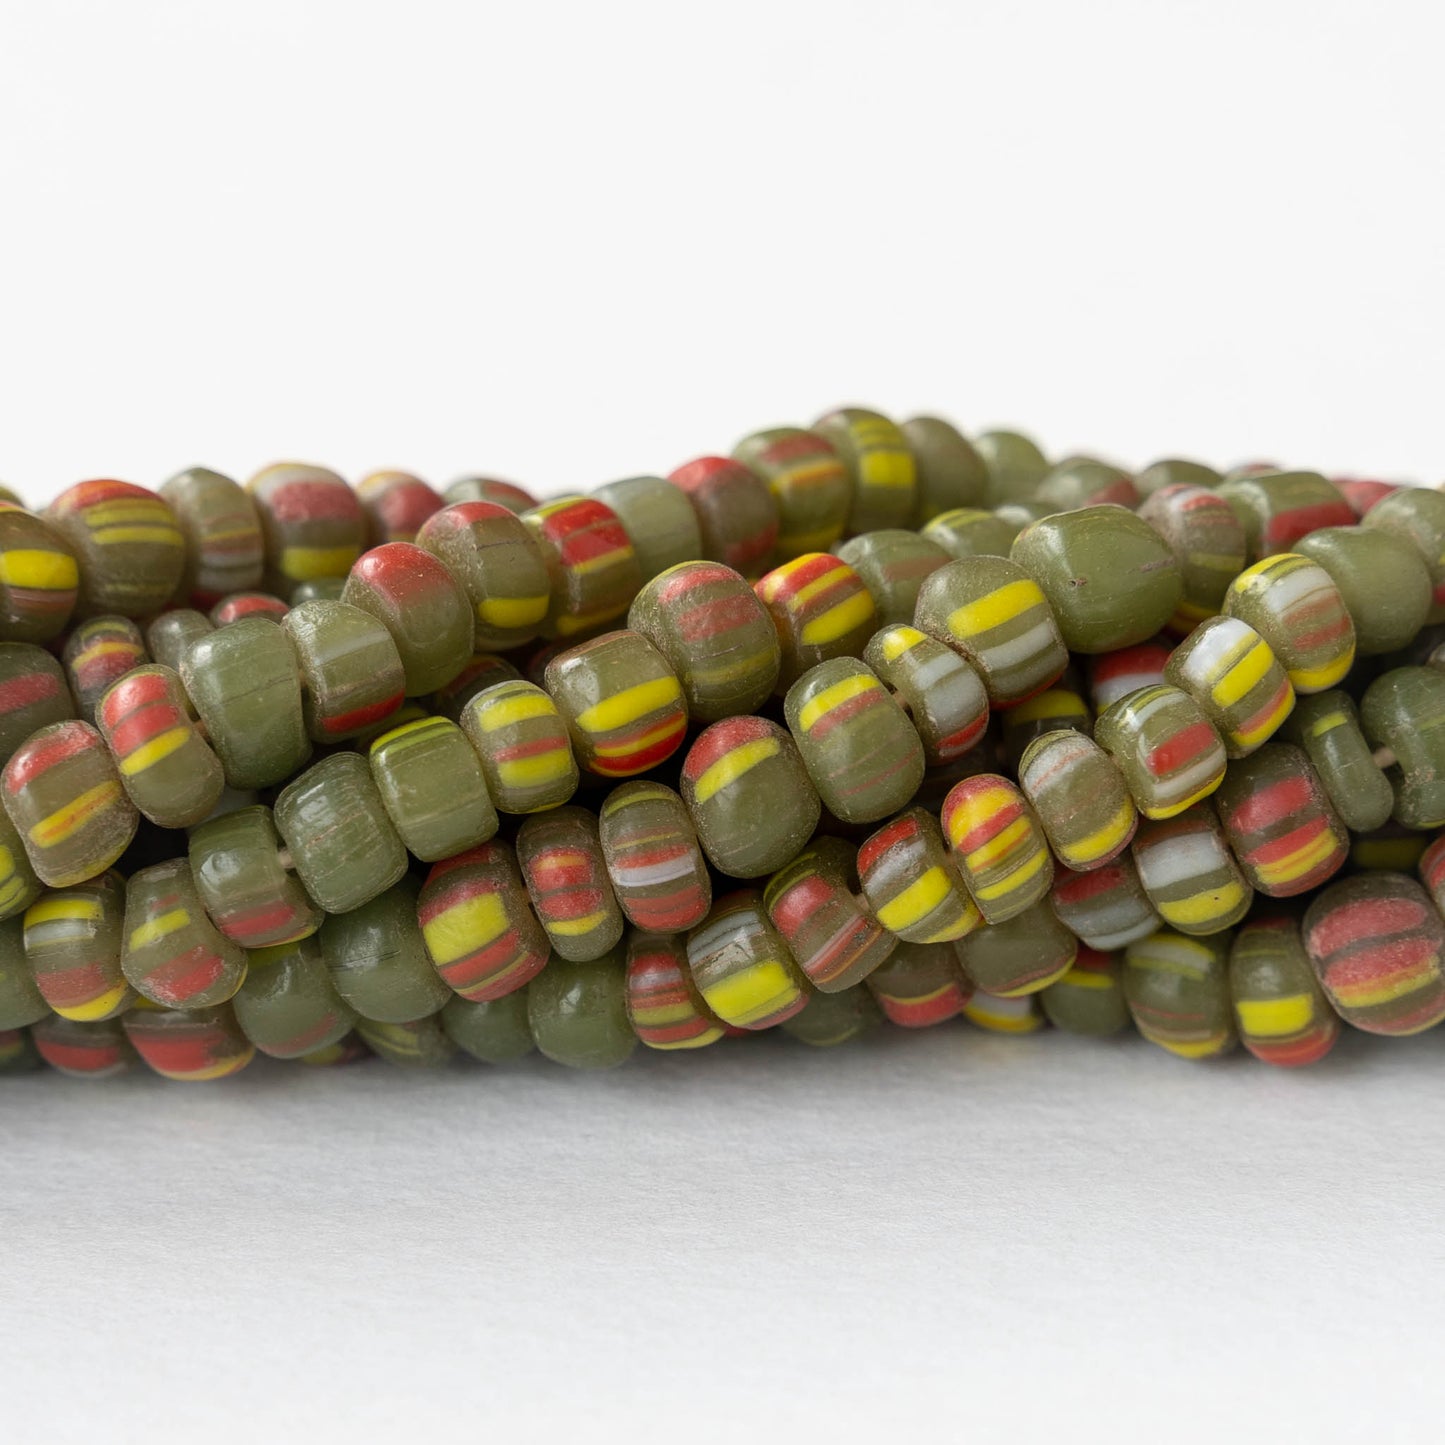 Java Trade Beads - Striped Olive Green - 12 Inches